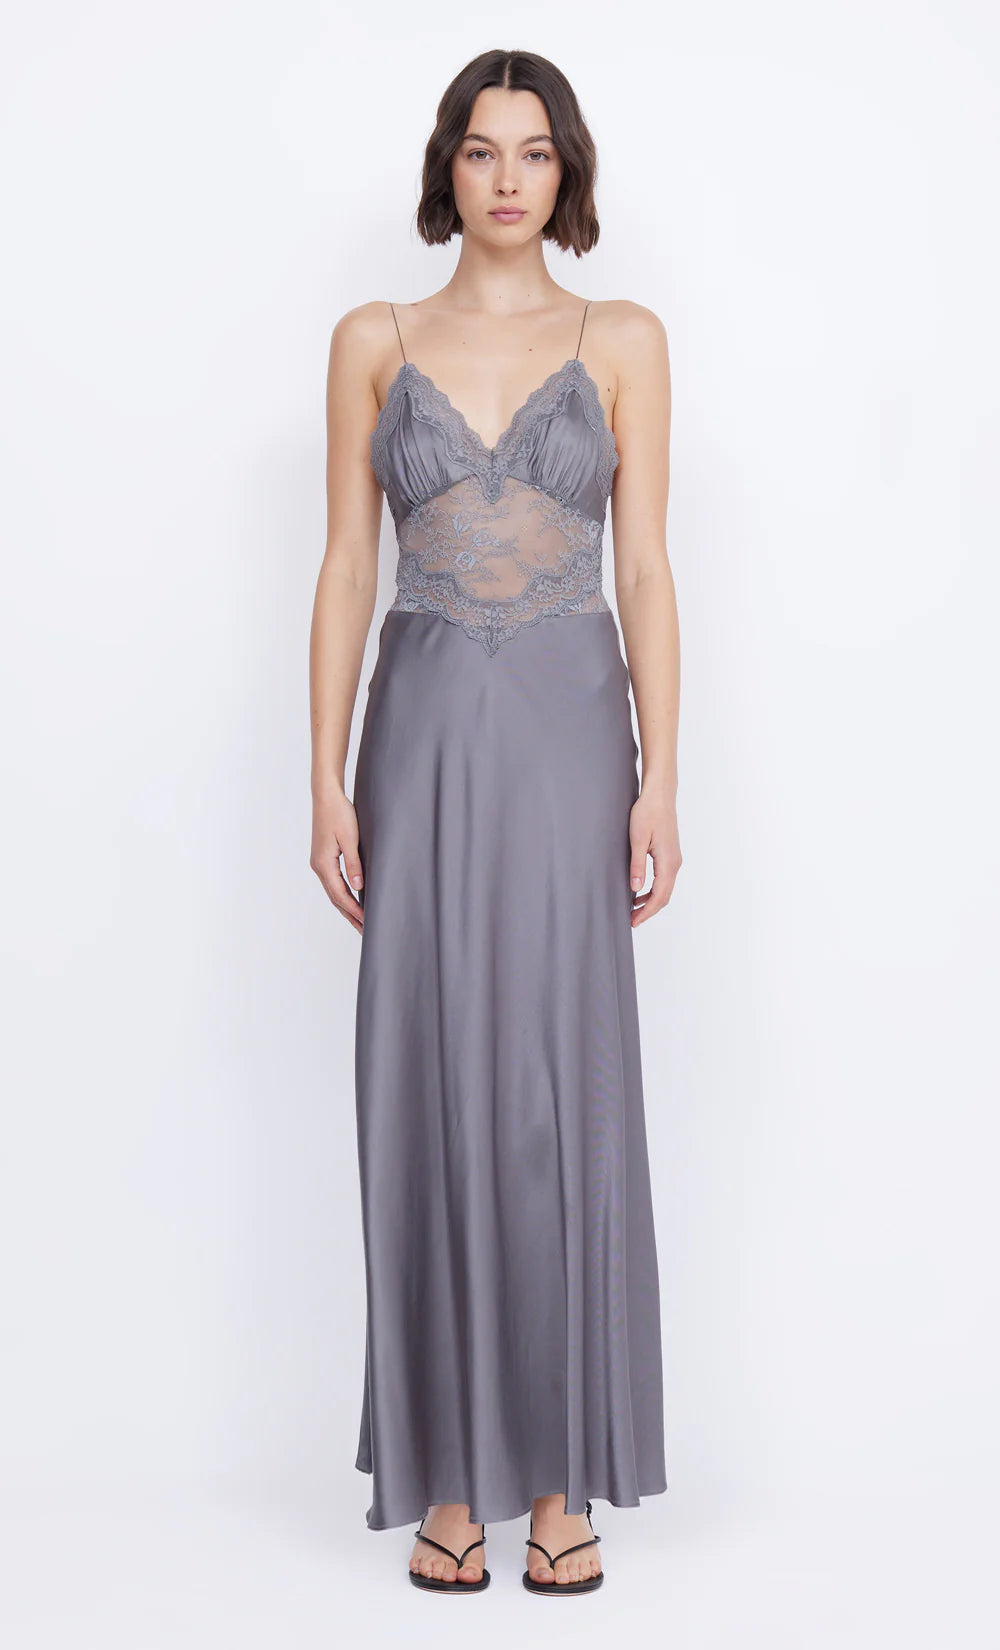 AMORAS GOWN